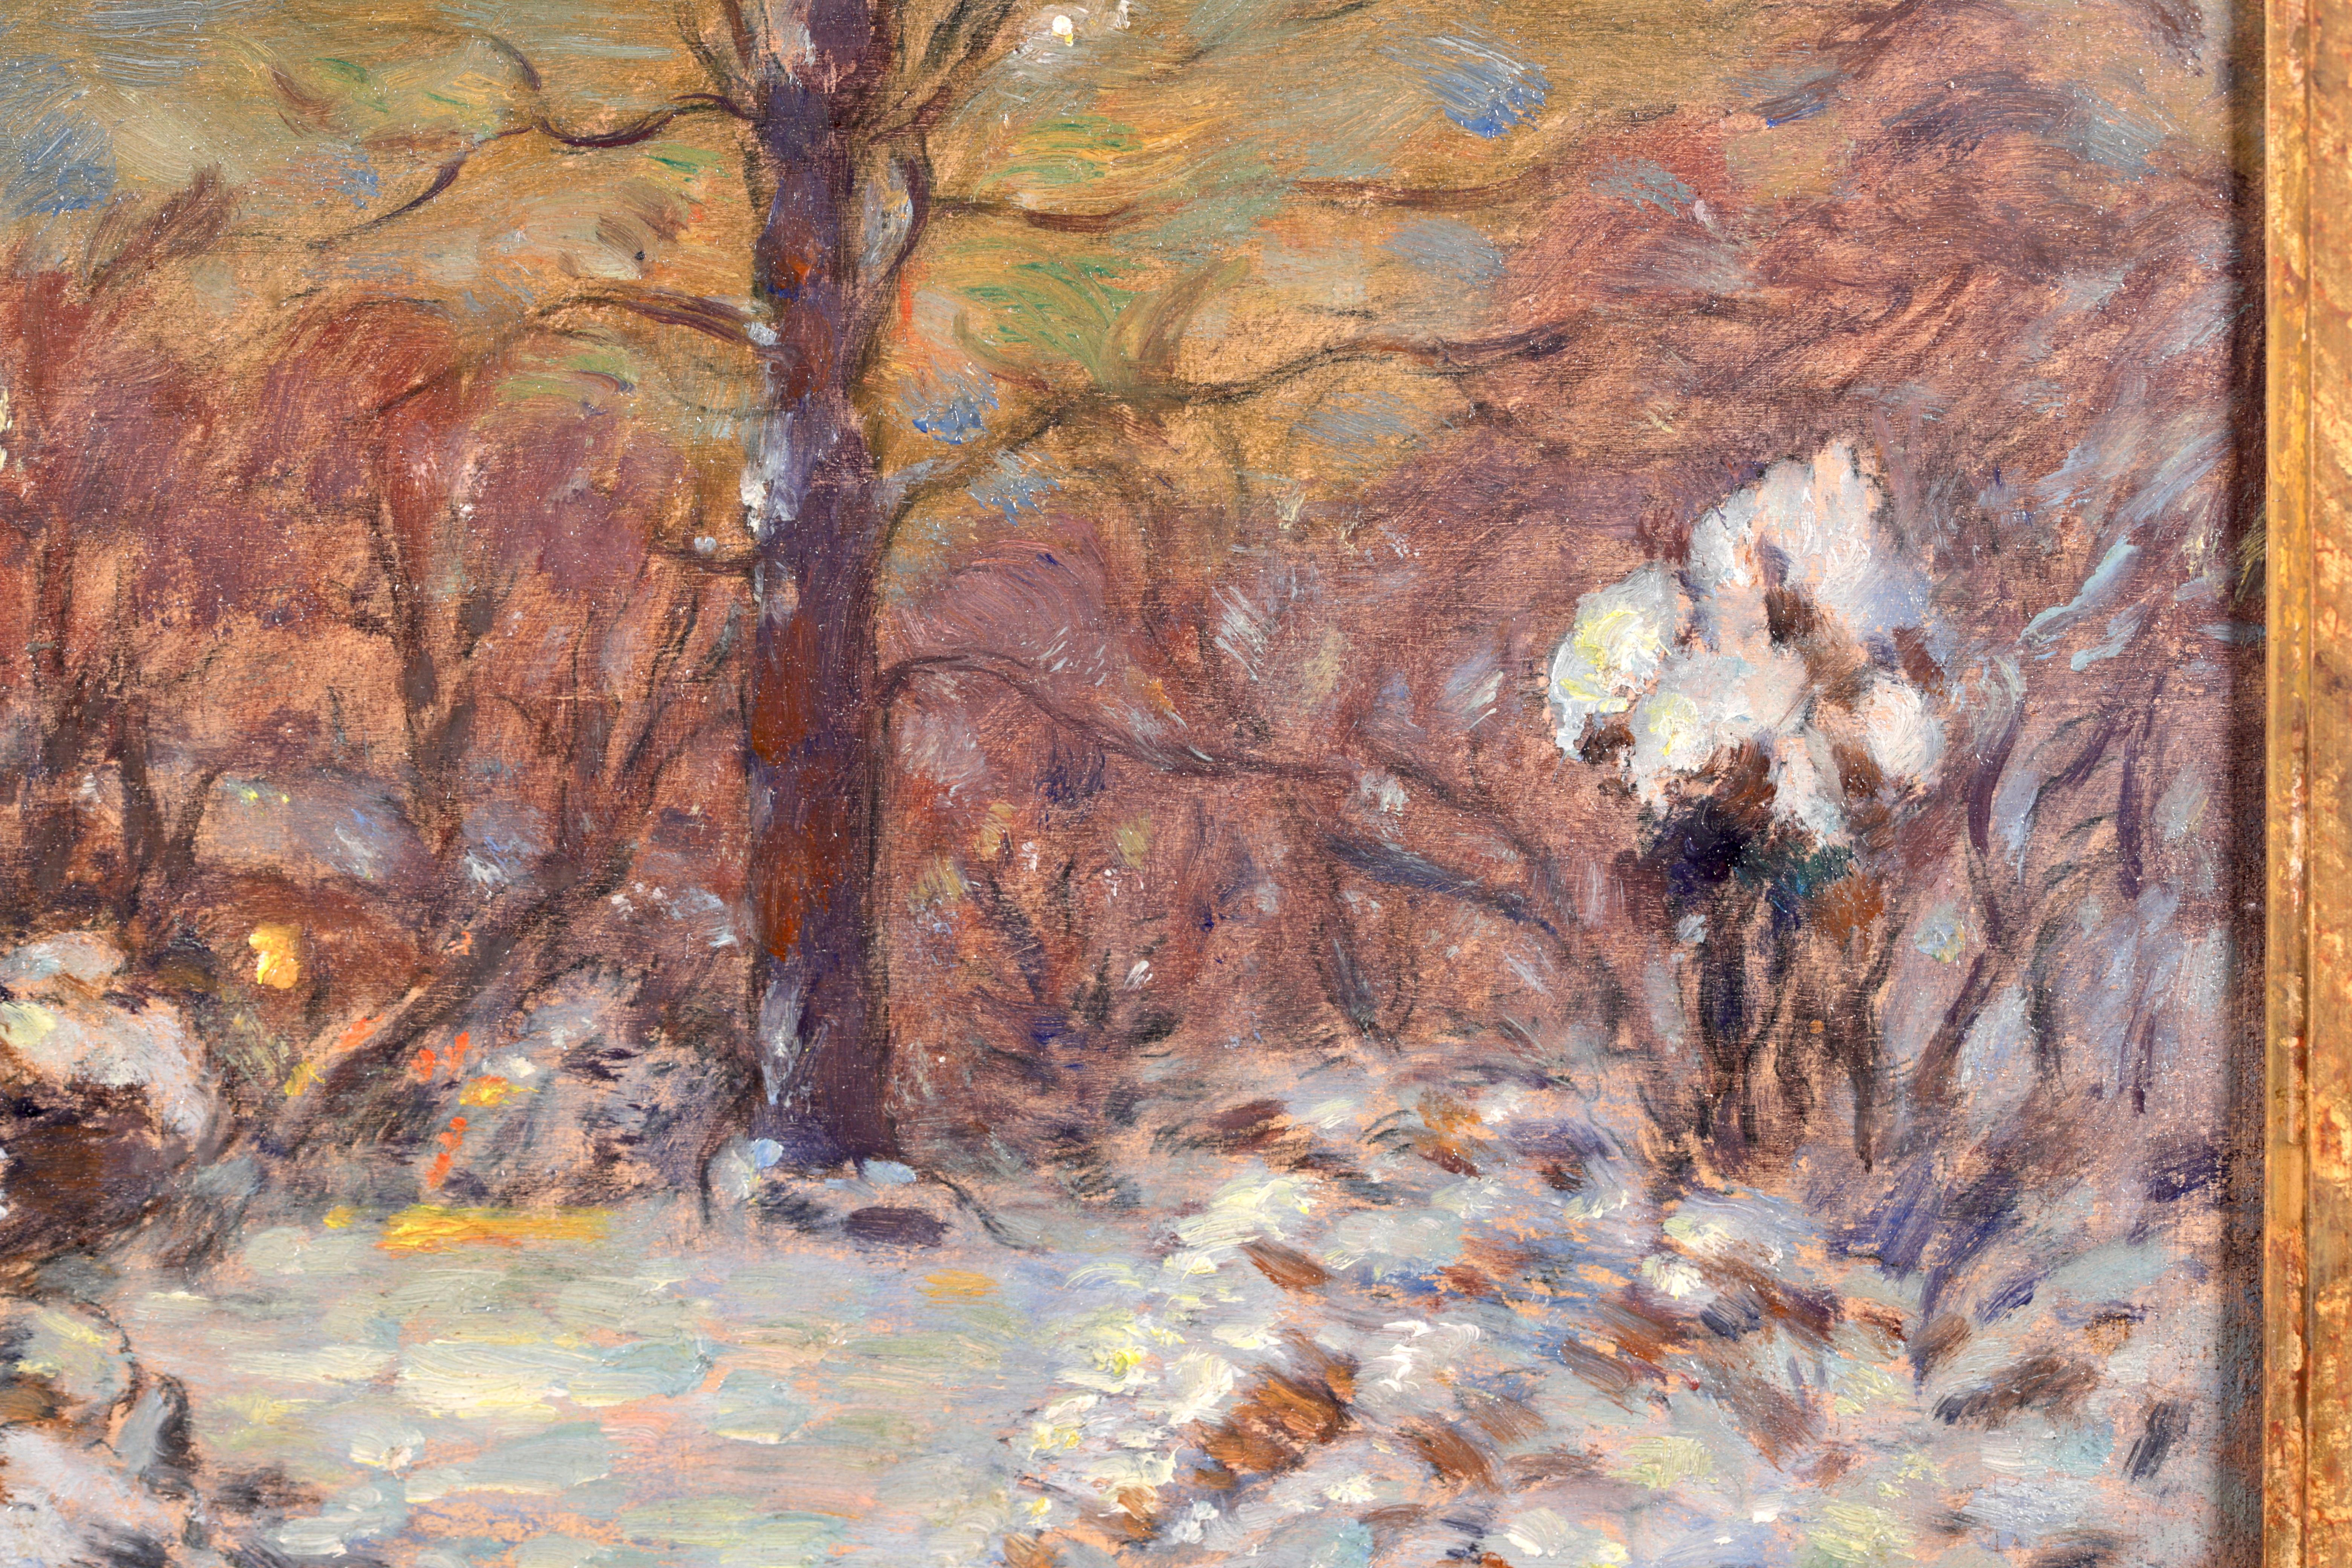 Flowers in Snow - Impressionist Oil, Snowy Winter Landscape by Marie Duhem 1